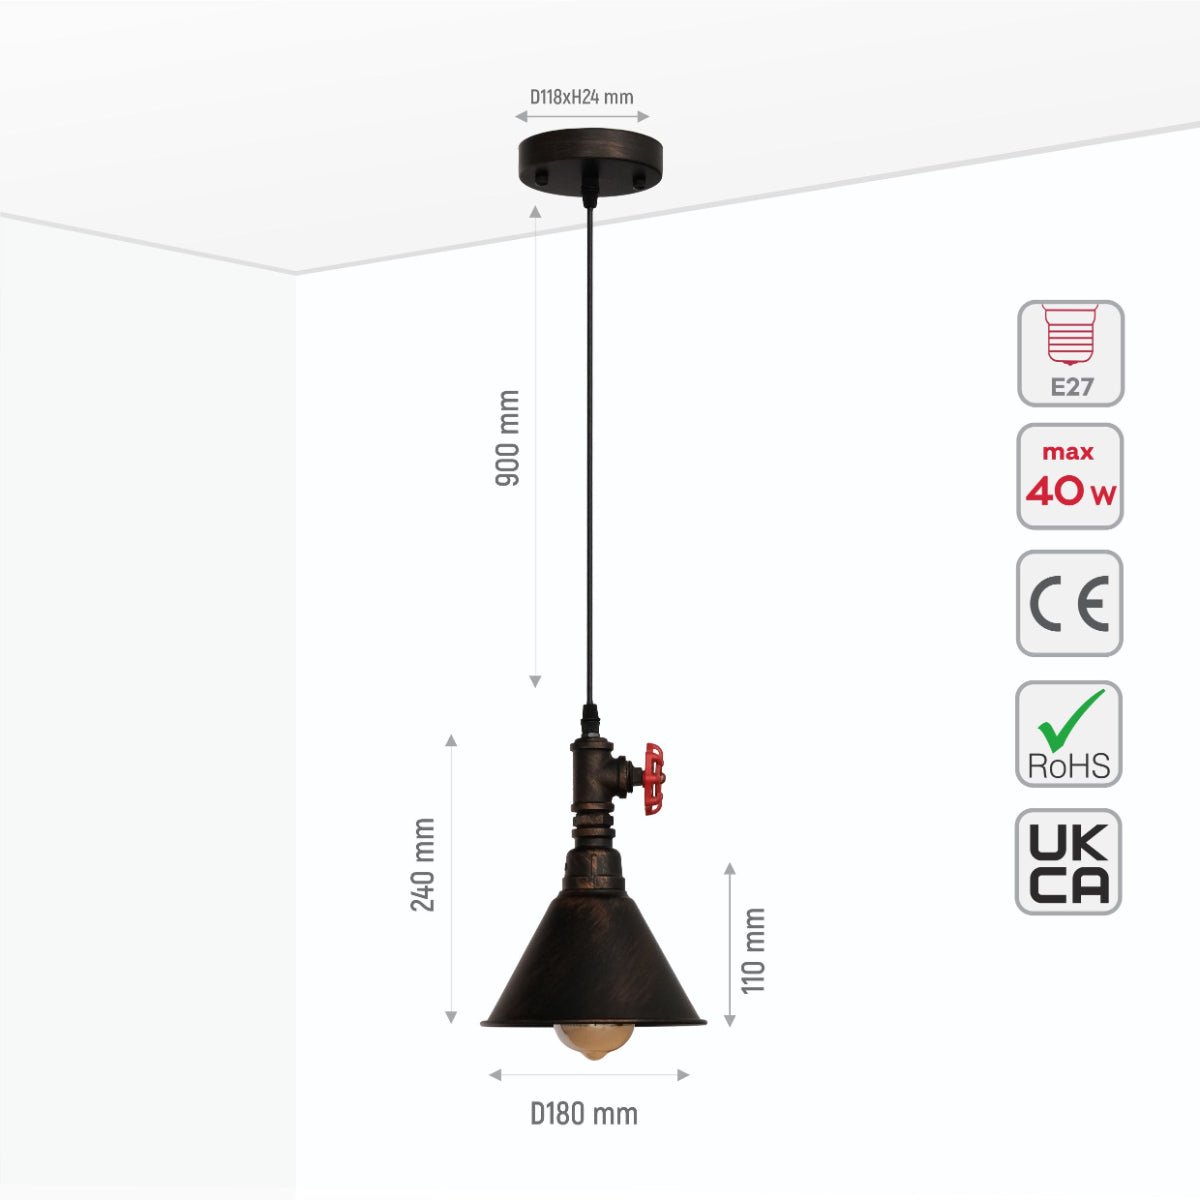 Size and specs of Black Gules Metal Funnel Valve Pendant Ceiling Light Small with E27 | TEKLED 150-17940